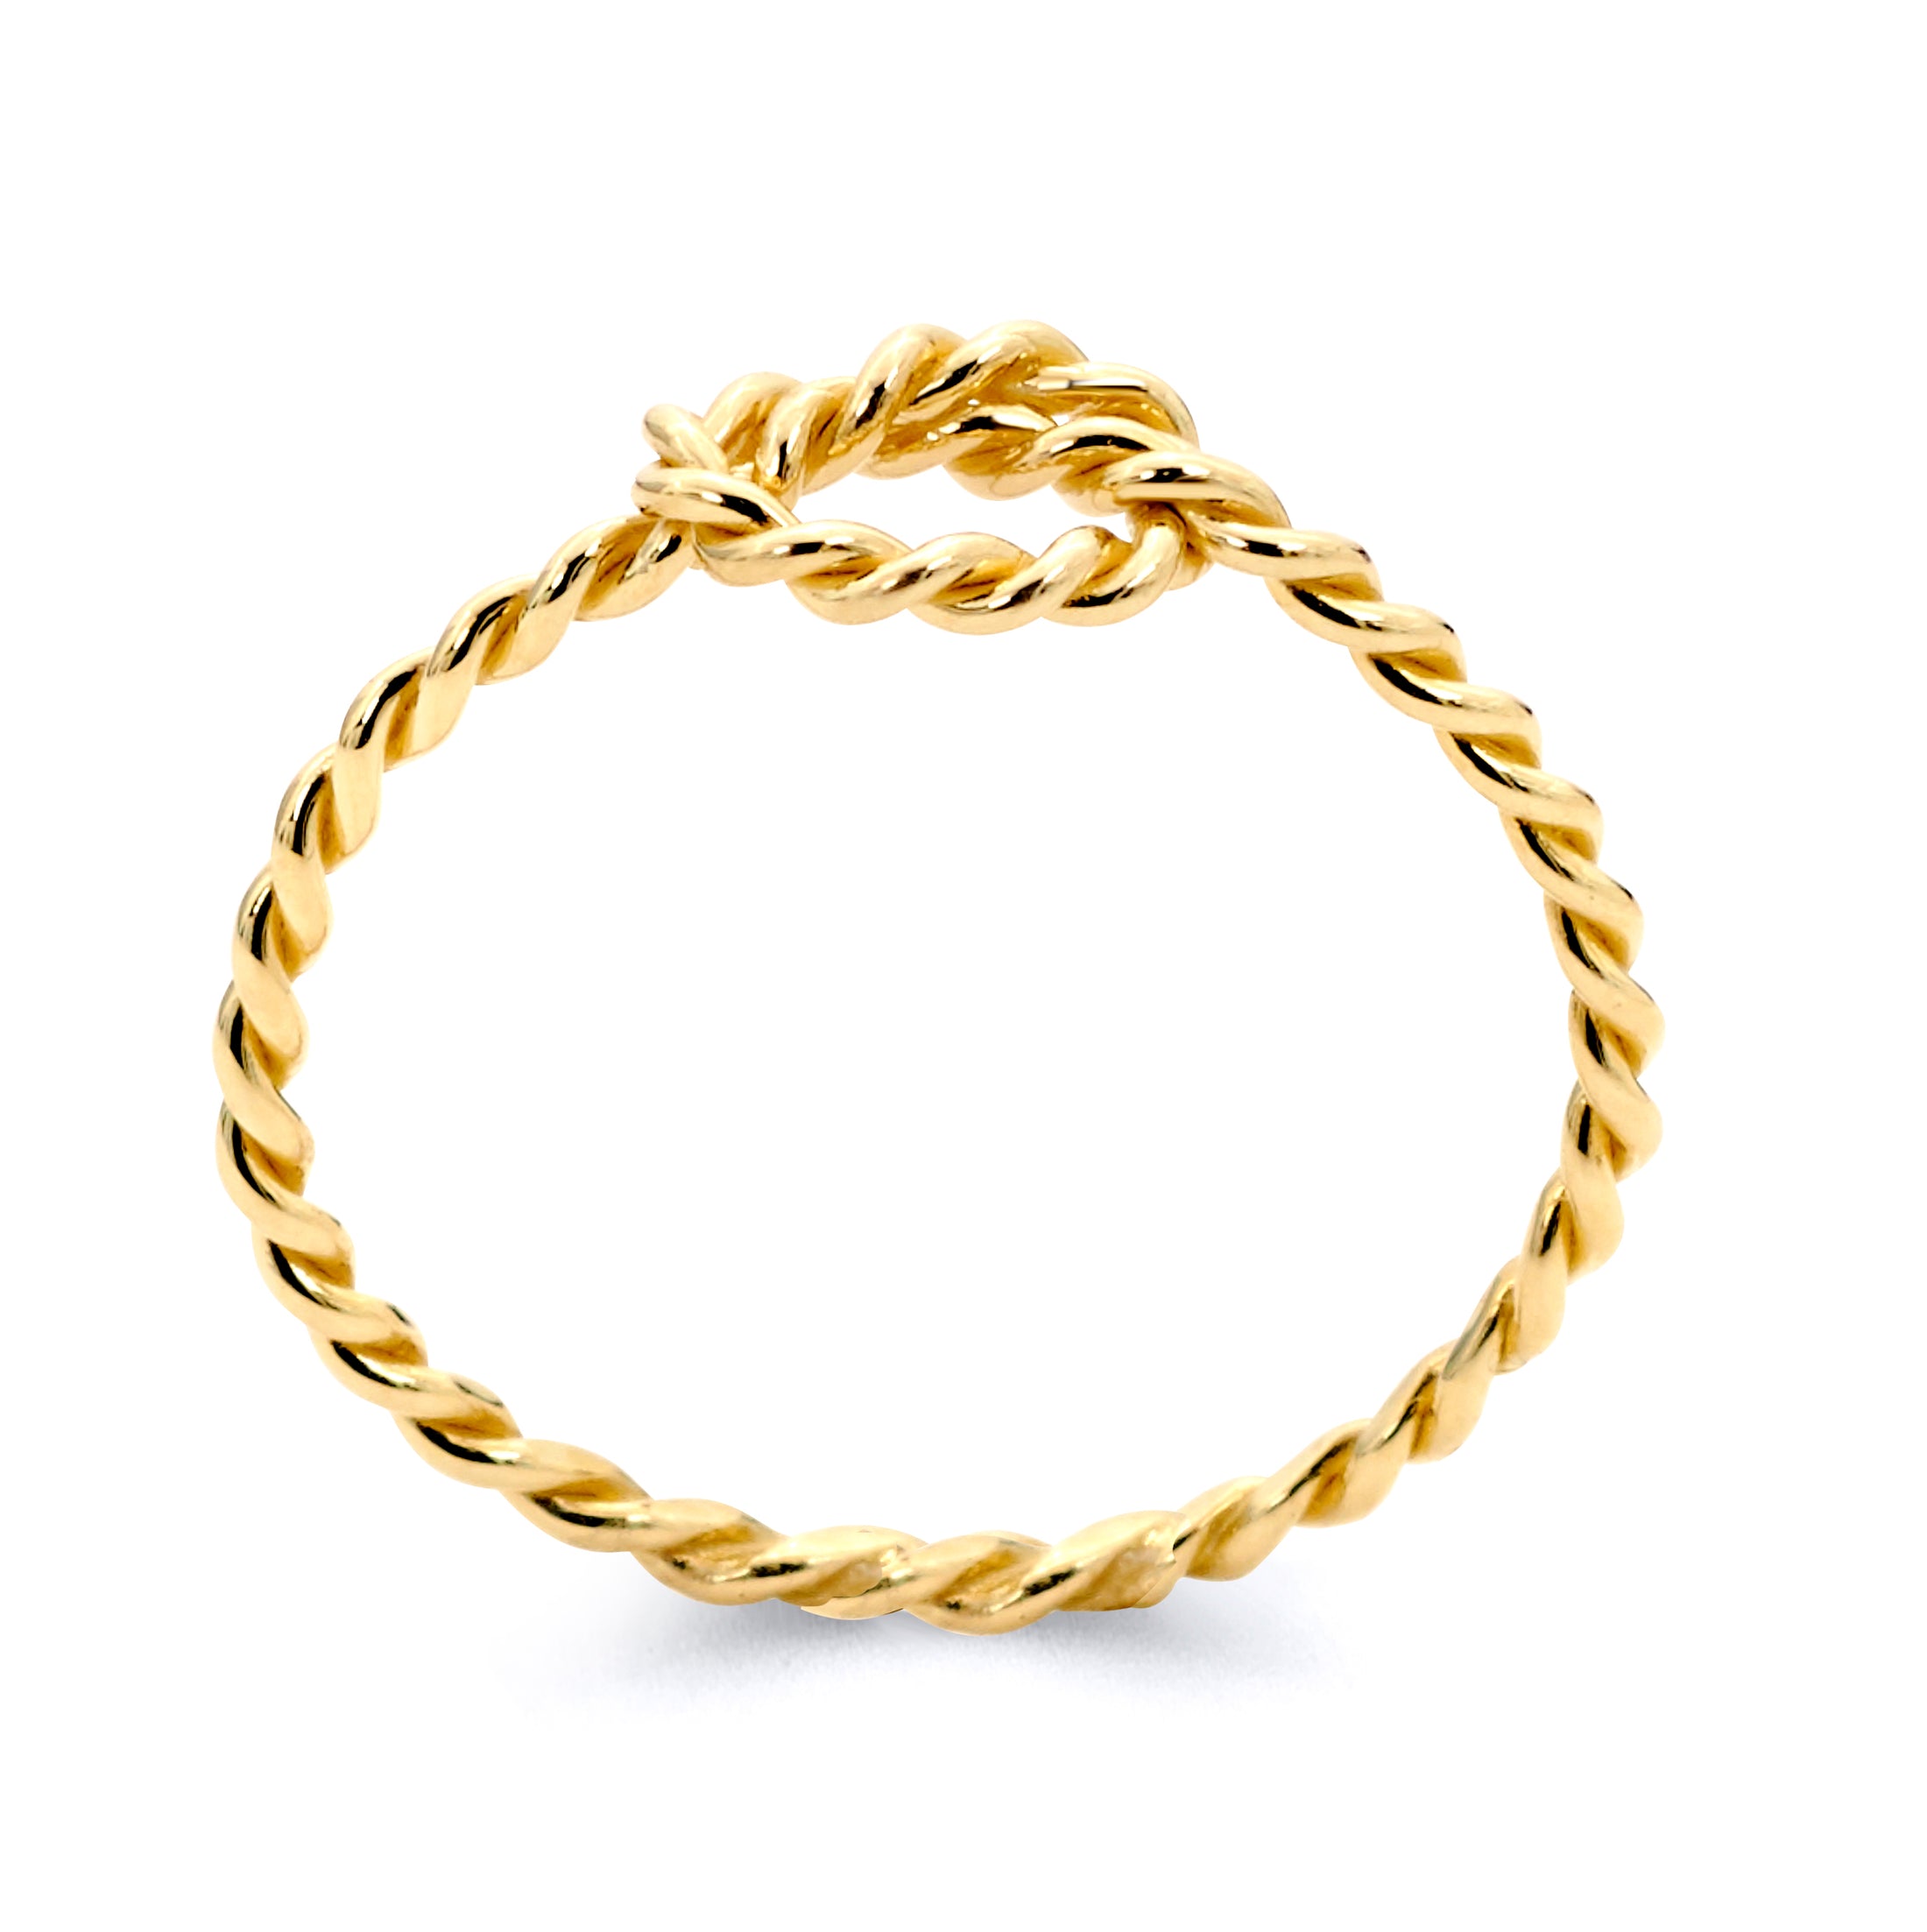 Solid Gold Knot Ring - 10k or 14k